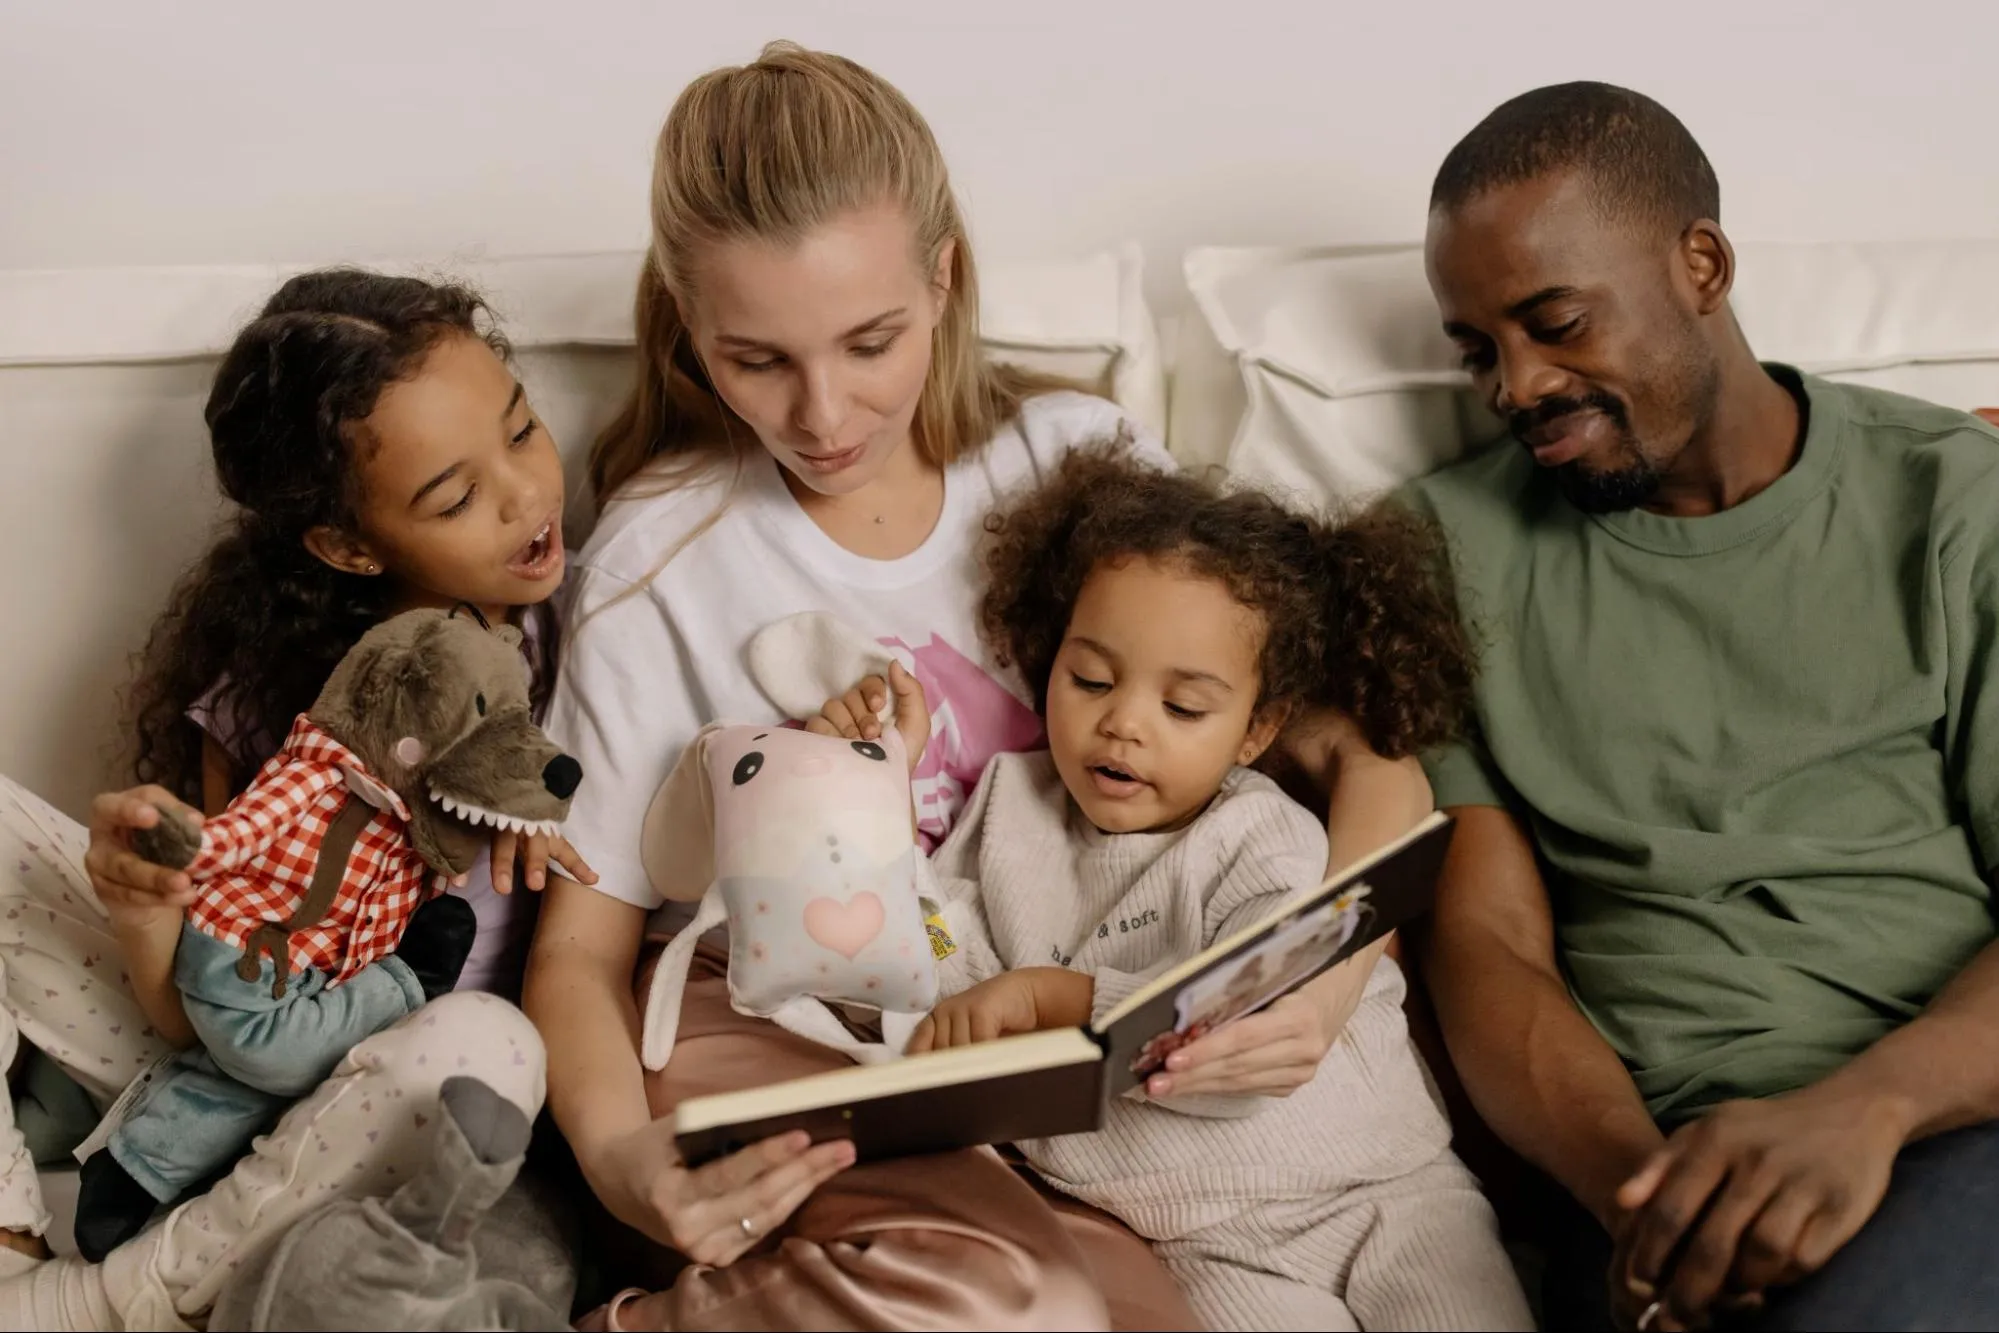 How do parents influence a child's reading habits?